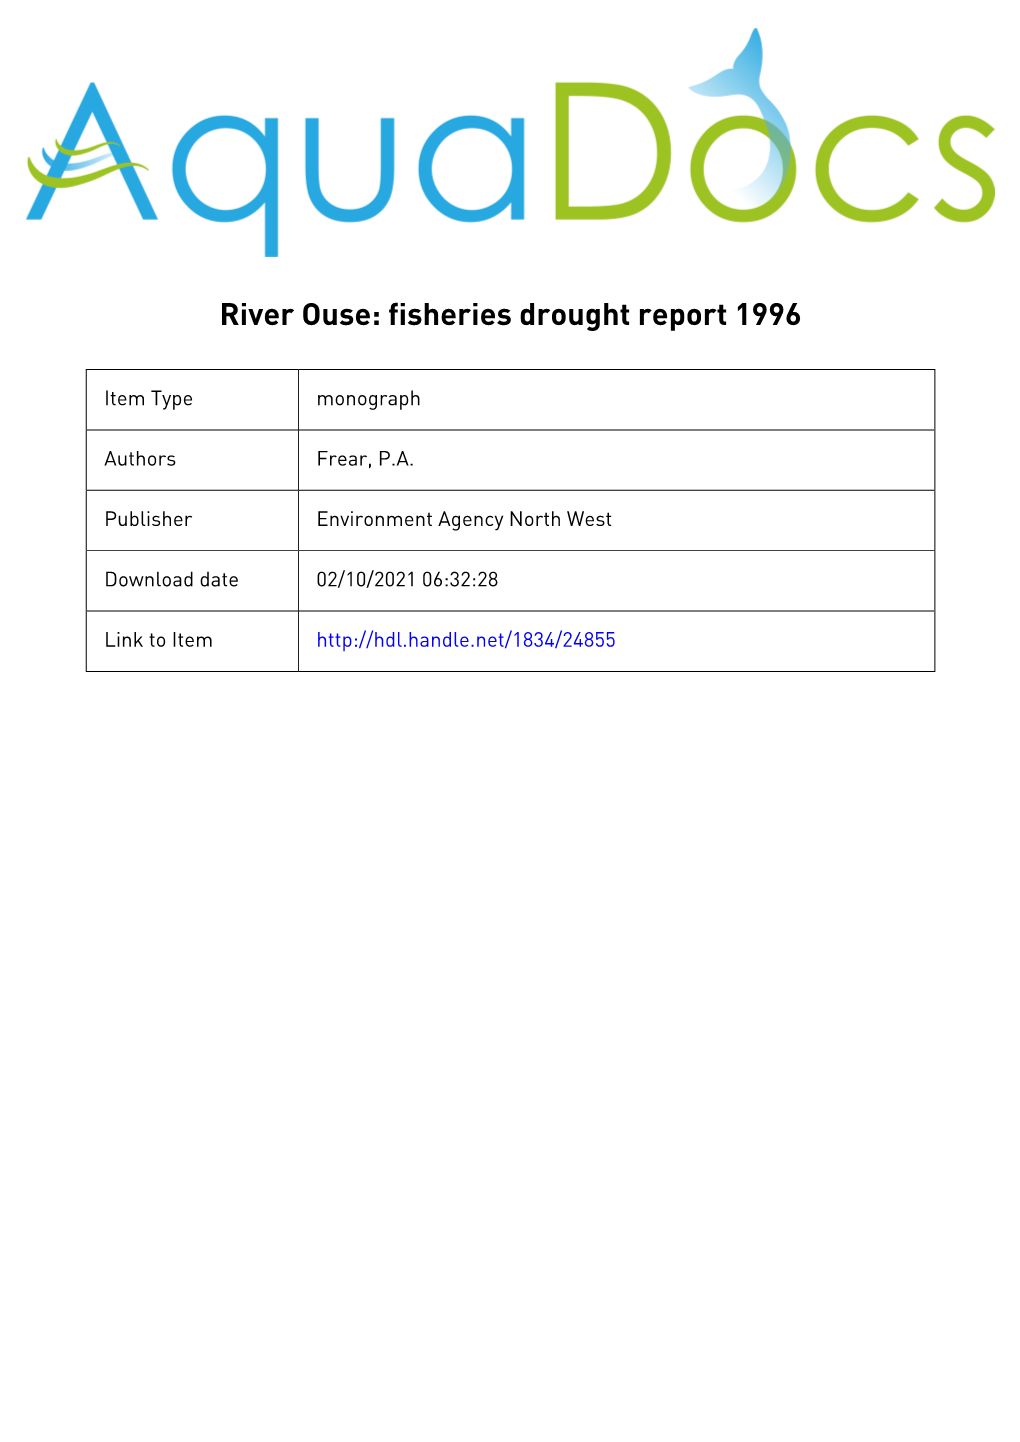 River Ouse Fisheries Drought Report 1996